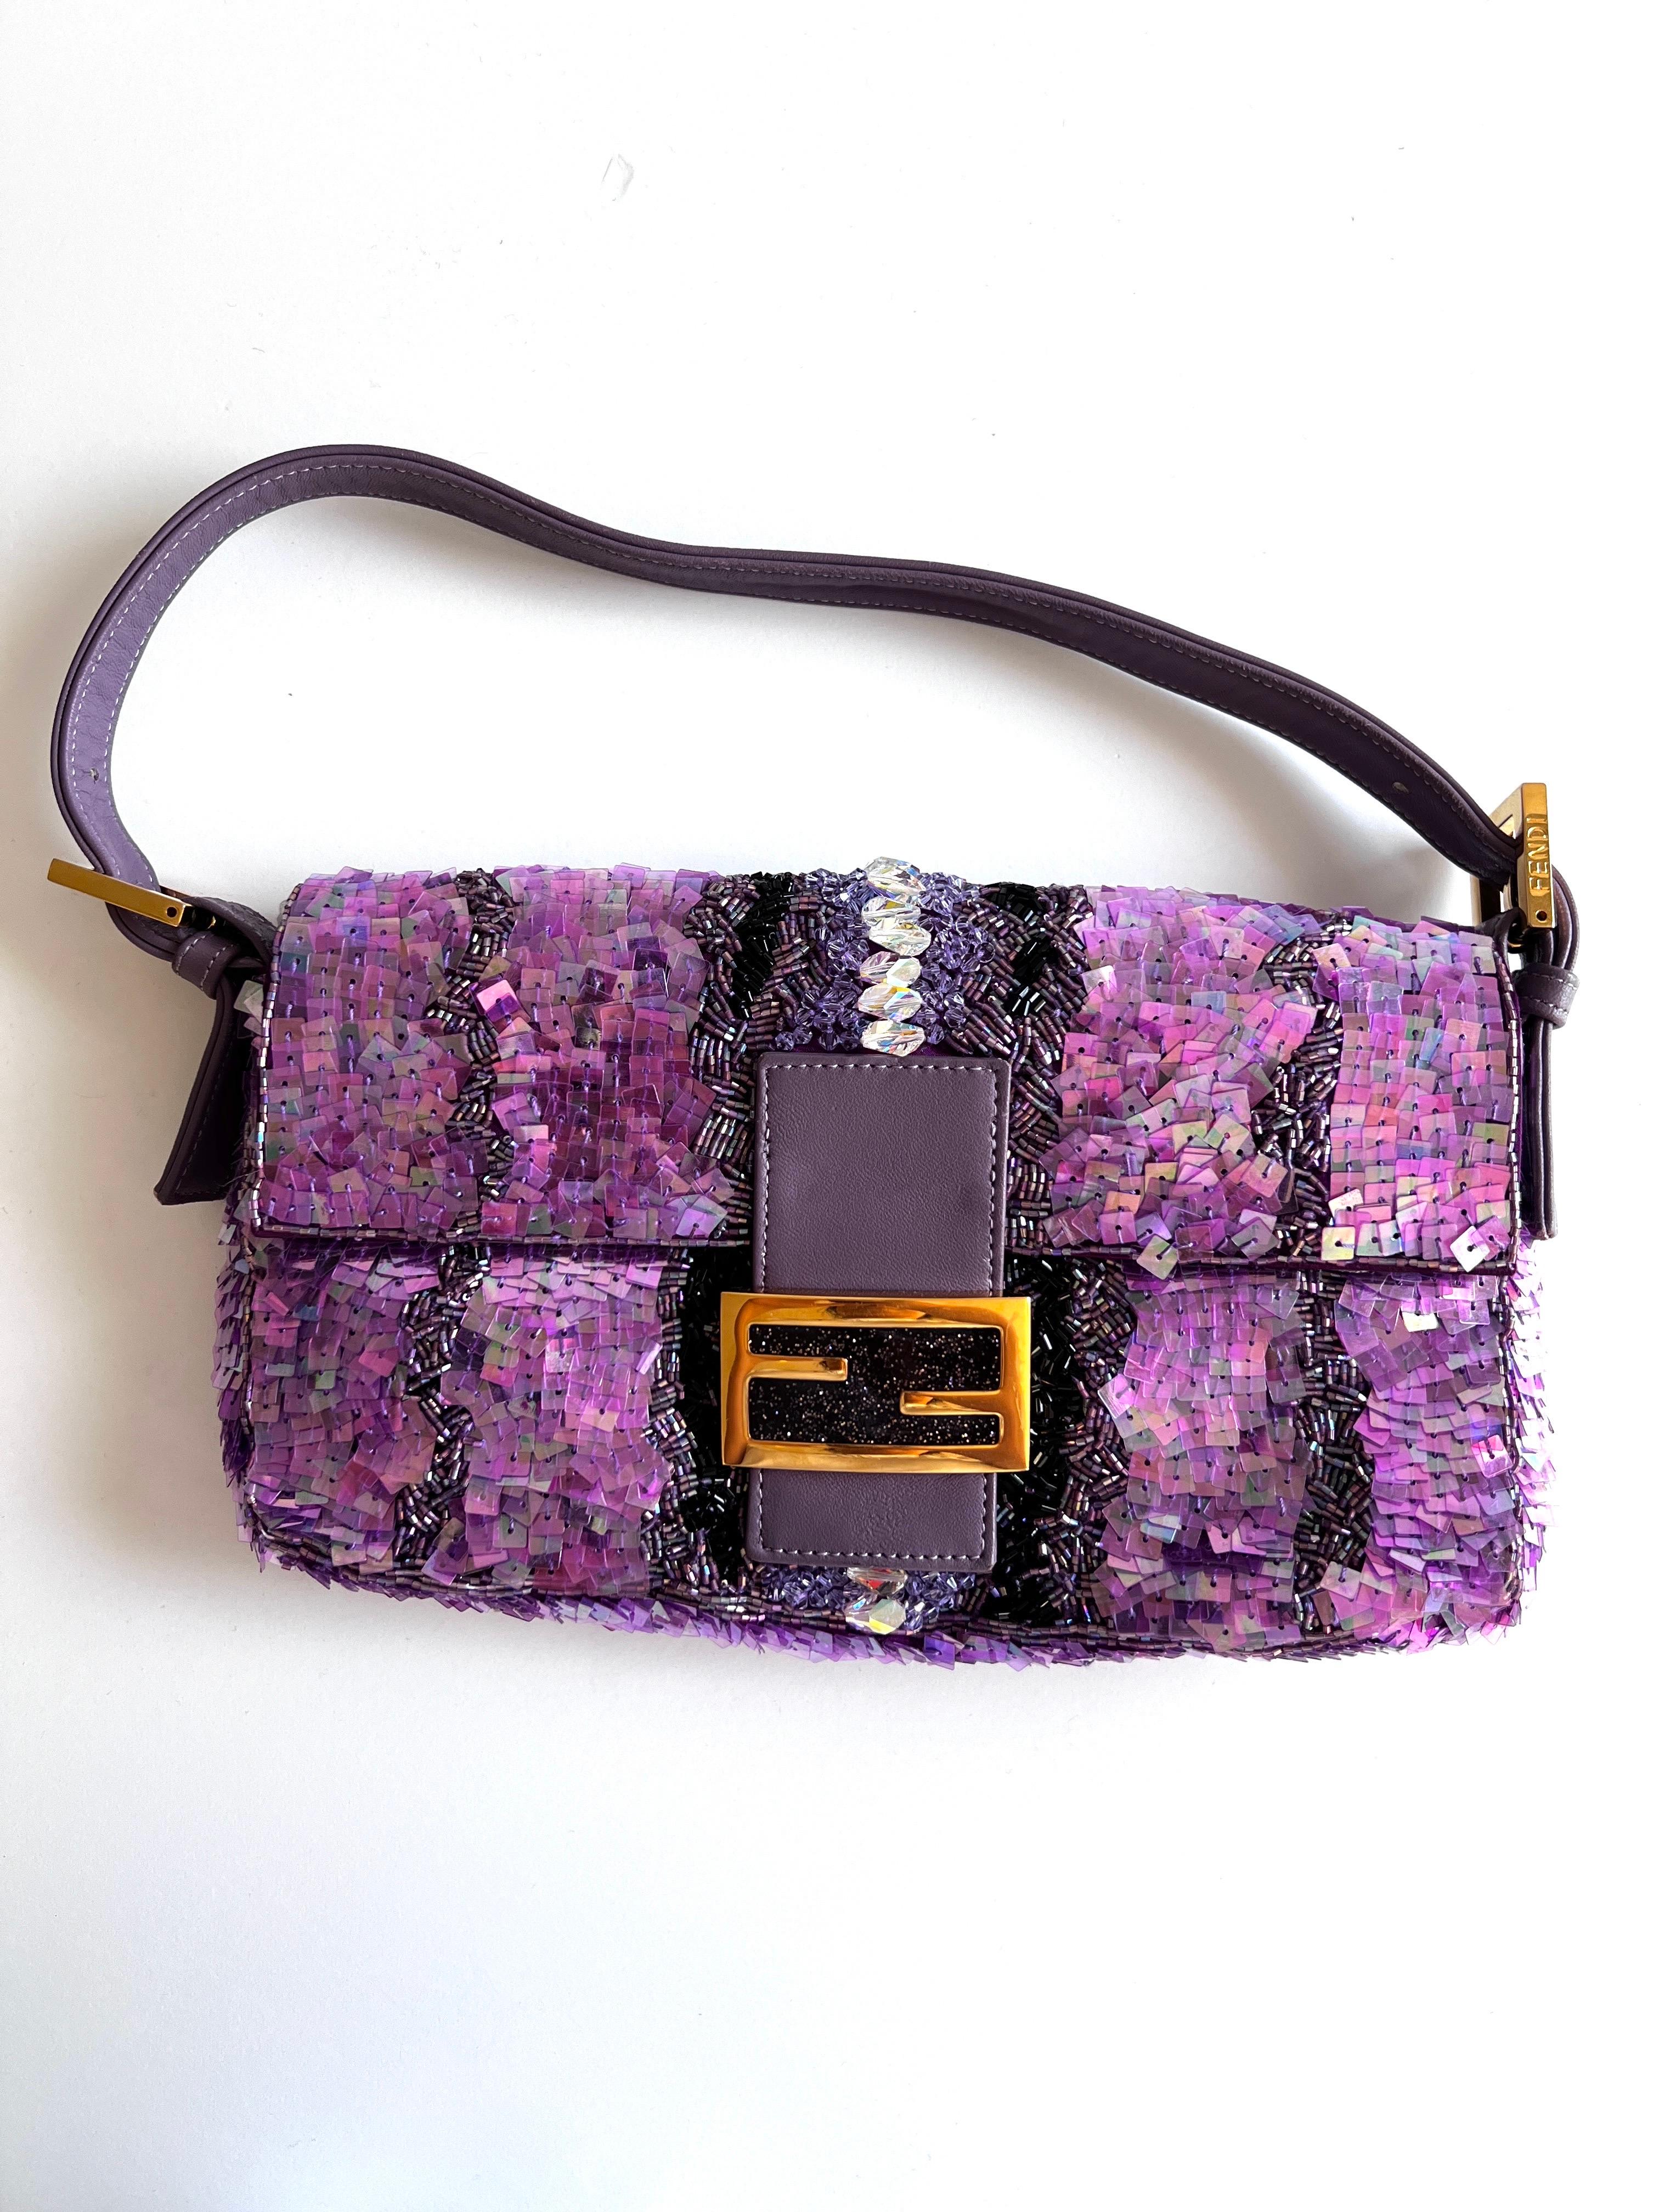 The Fendi Purple Sequin with Rhinestone Baguette. Crafted with meticulous attention to detail, this exquisite handbag is a testament to Fendi's unparalleled craftsmanship and style.

Each sequin is hand-sewn onto sumptuous purple fabric, creating a